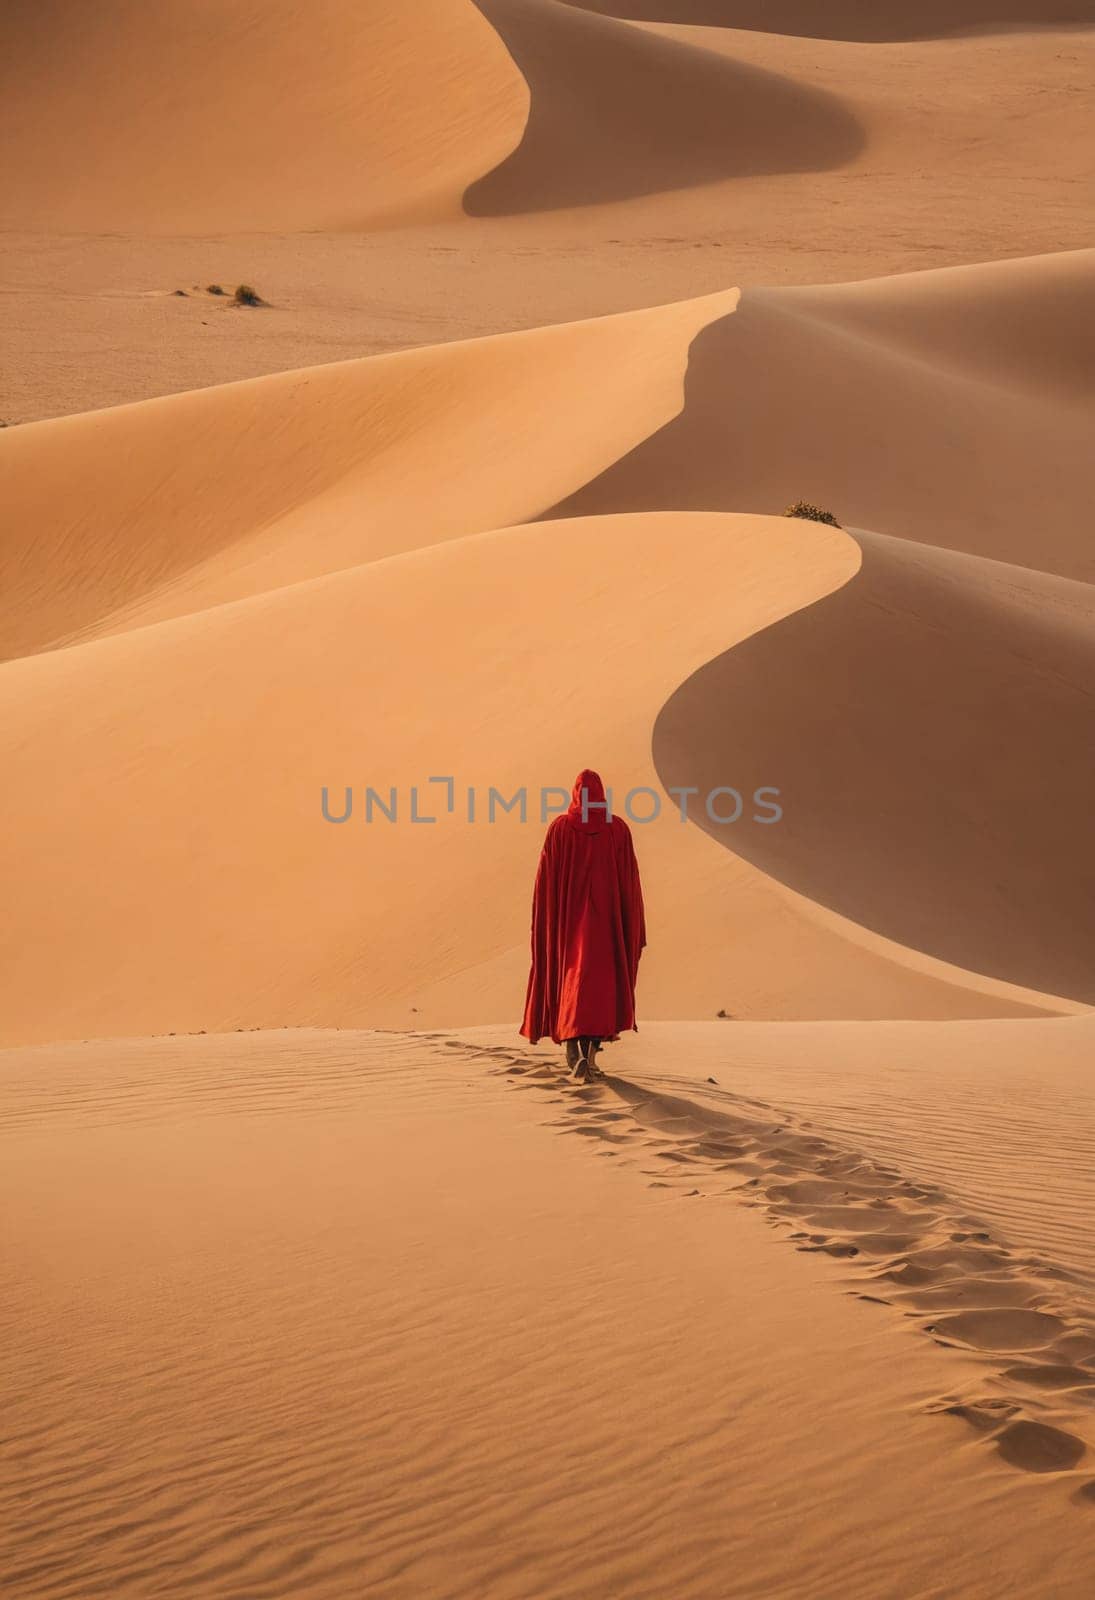 A person walks down a desert sand dune towards the horizon by Andre1ns